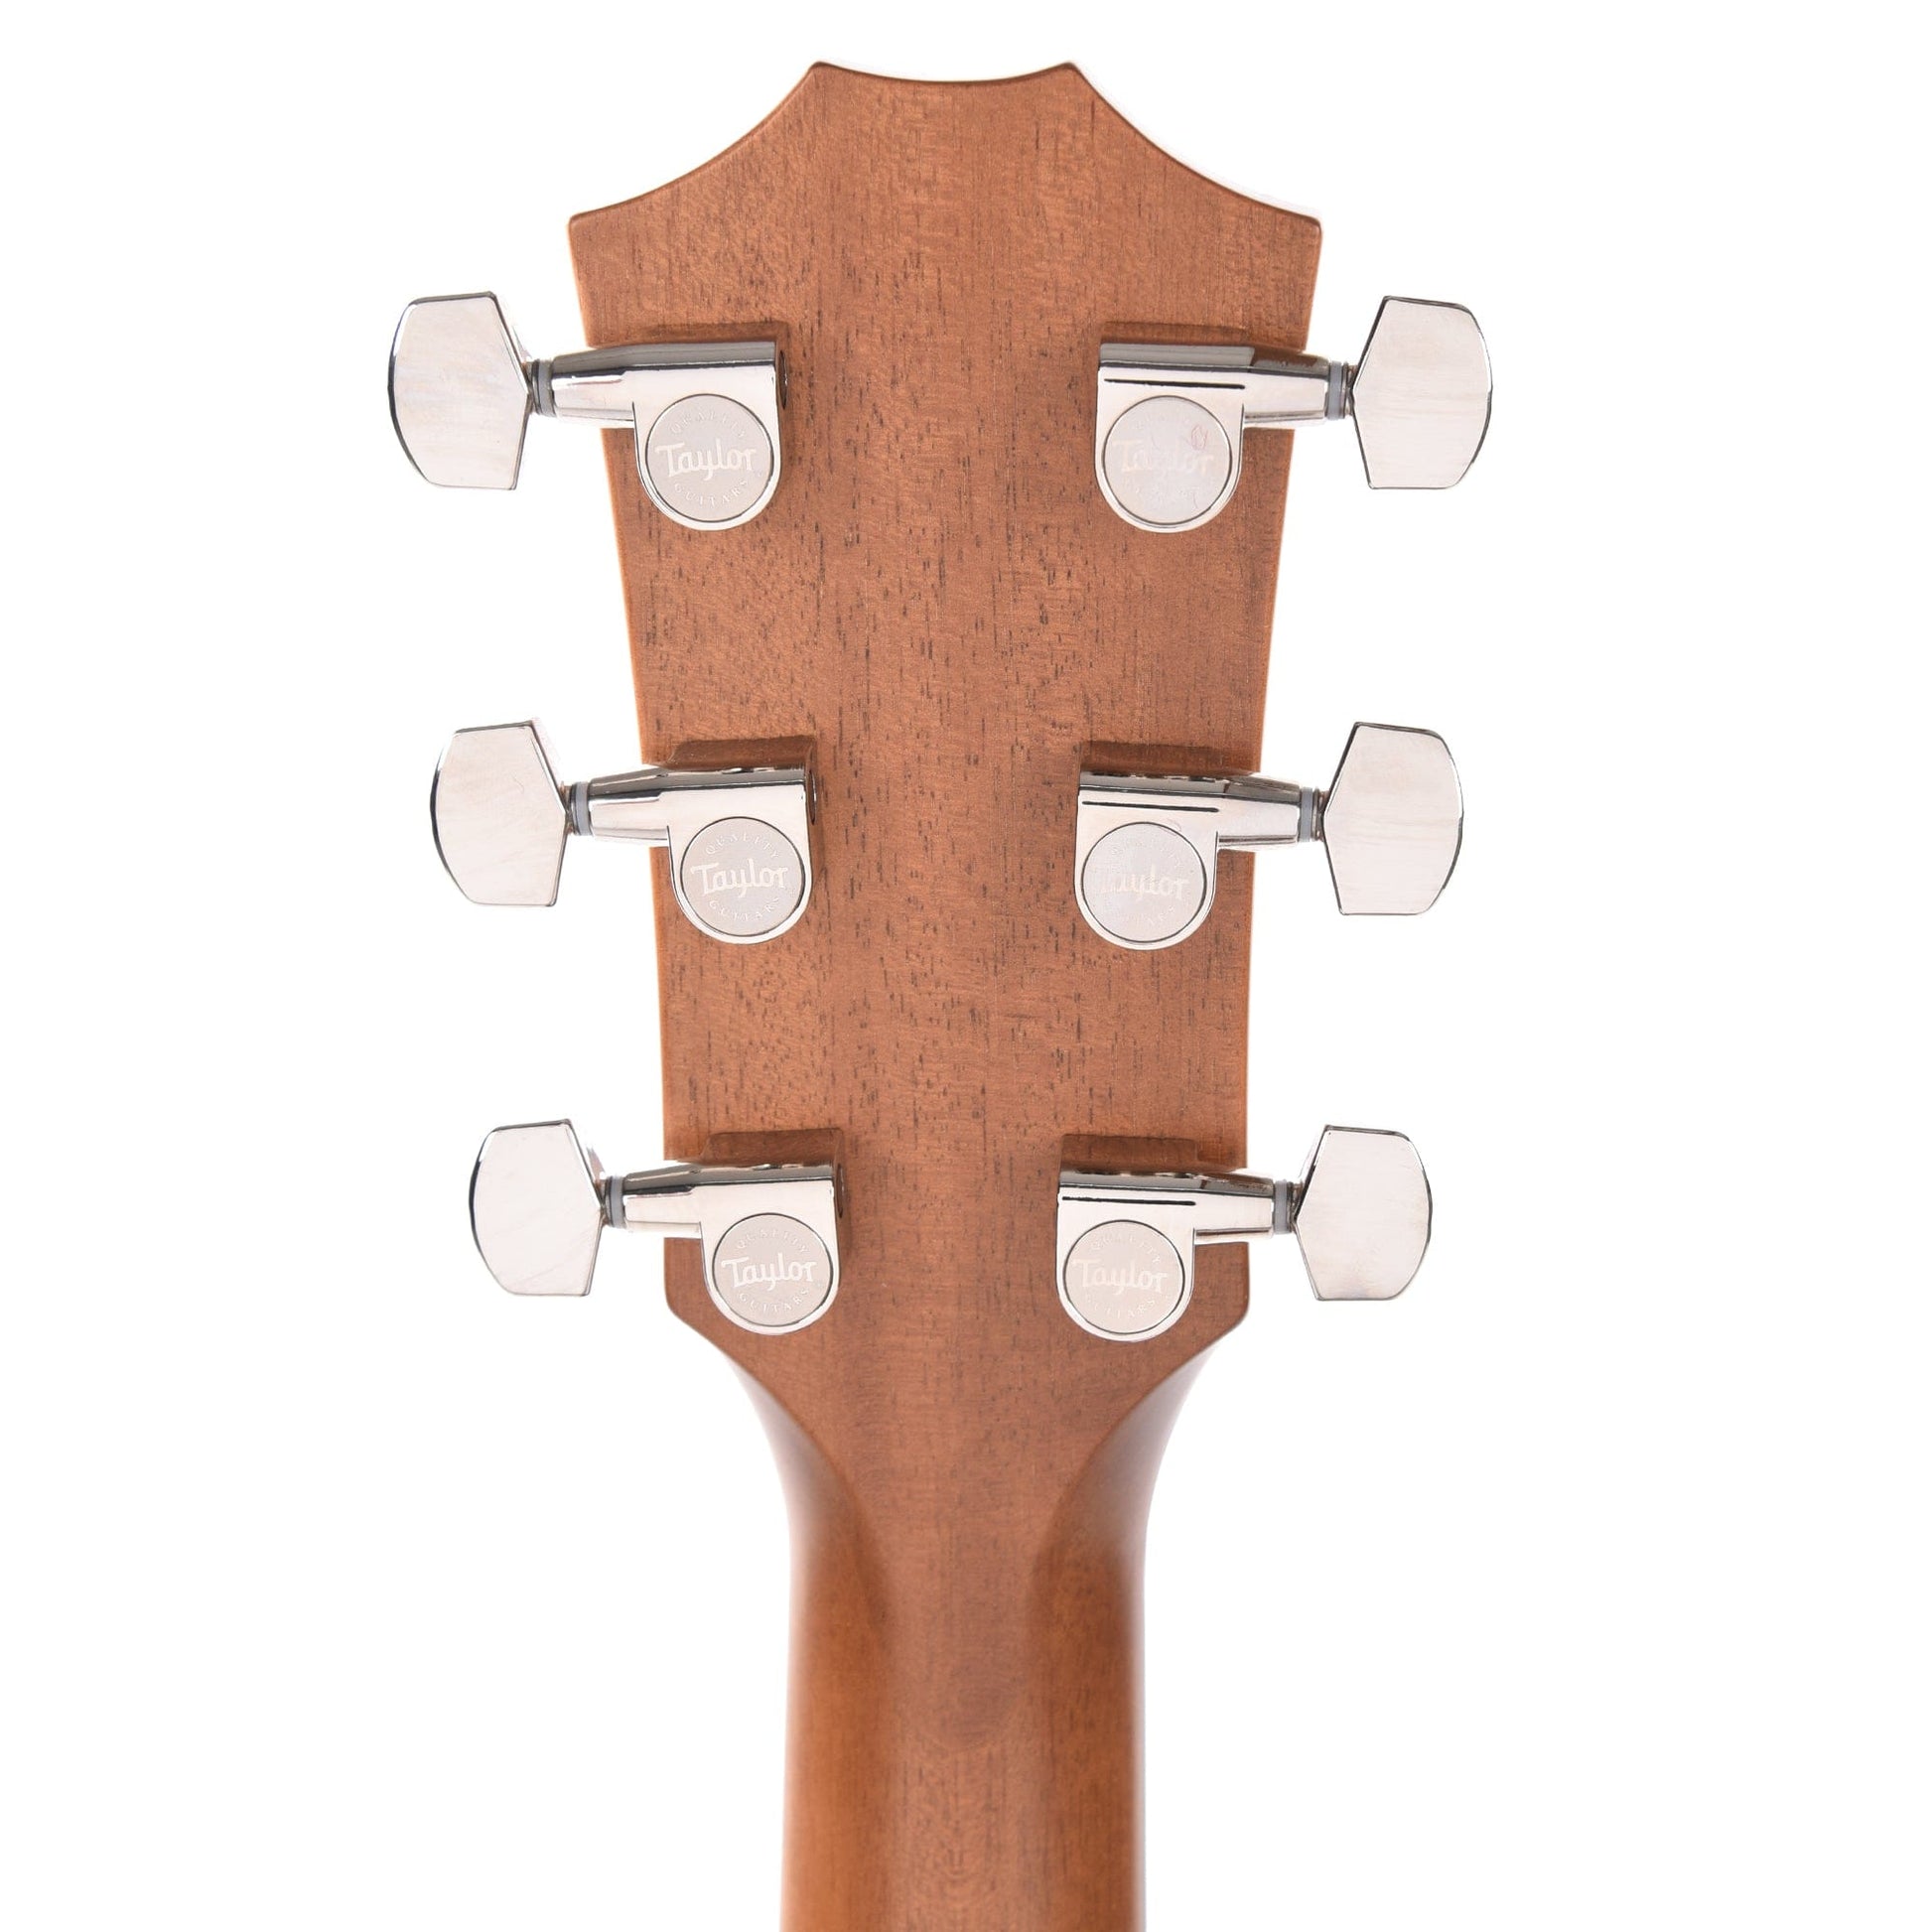 Taylor 517e Grand Pacific Torrefied Sitka/Eucalyptus Tobacco ES2 Acoustic Guitars / OM and Auditorium